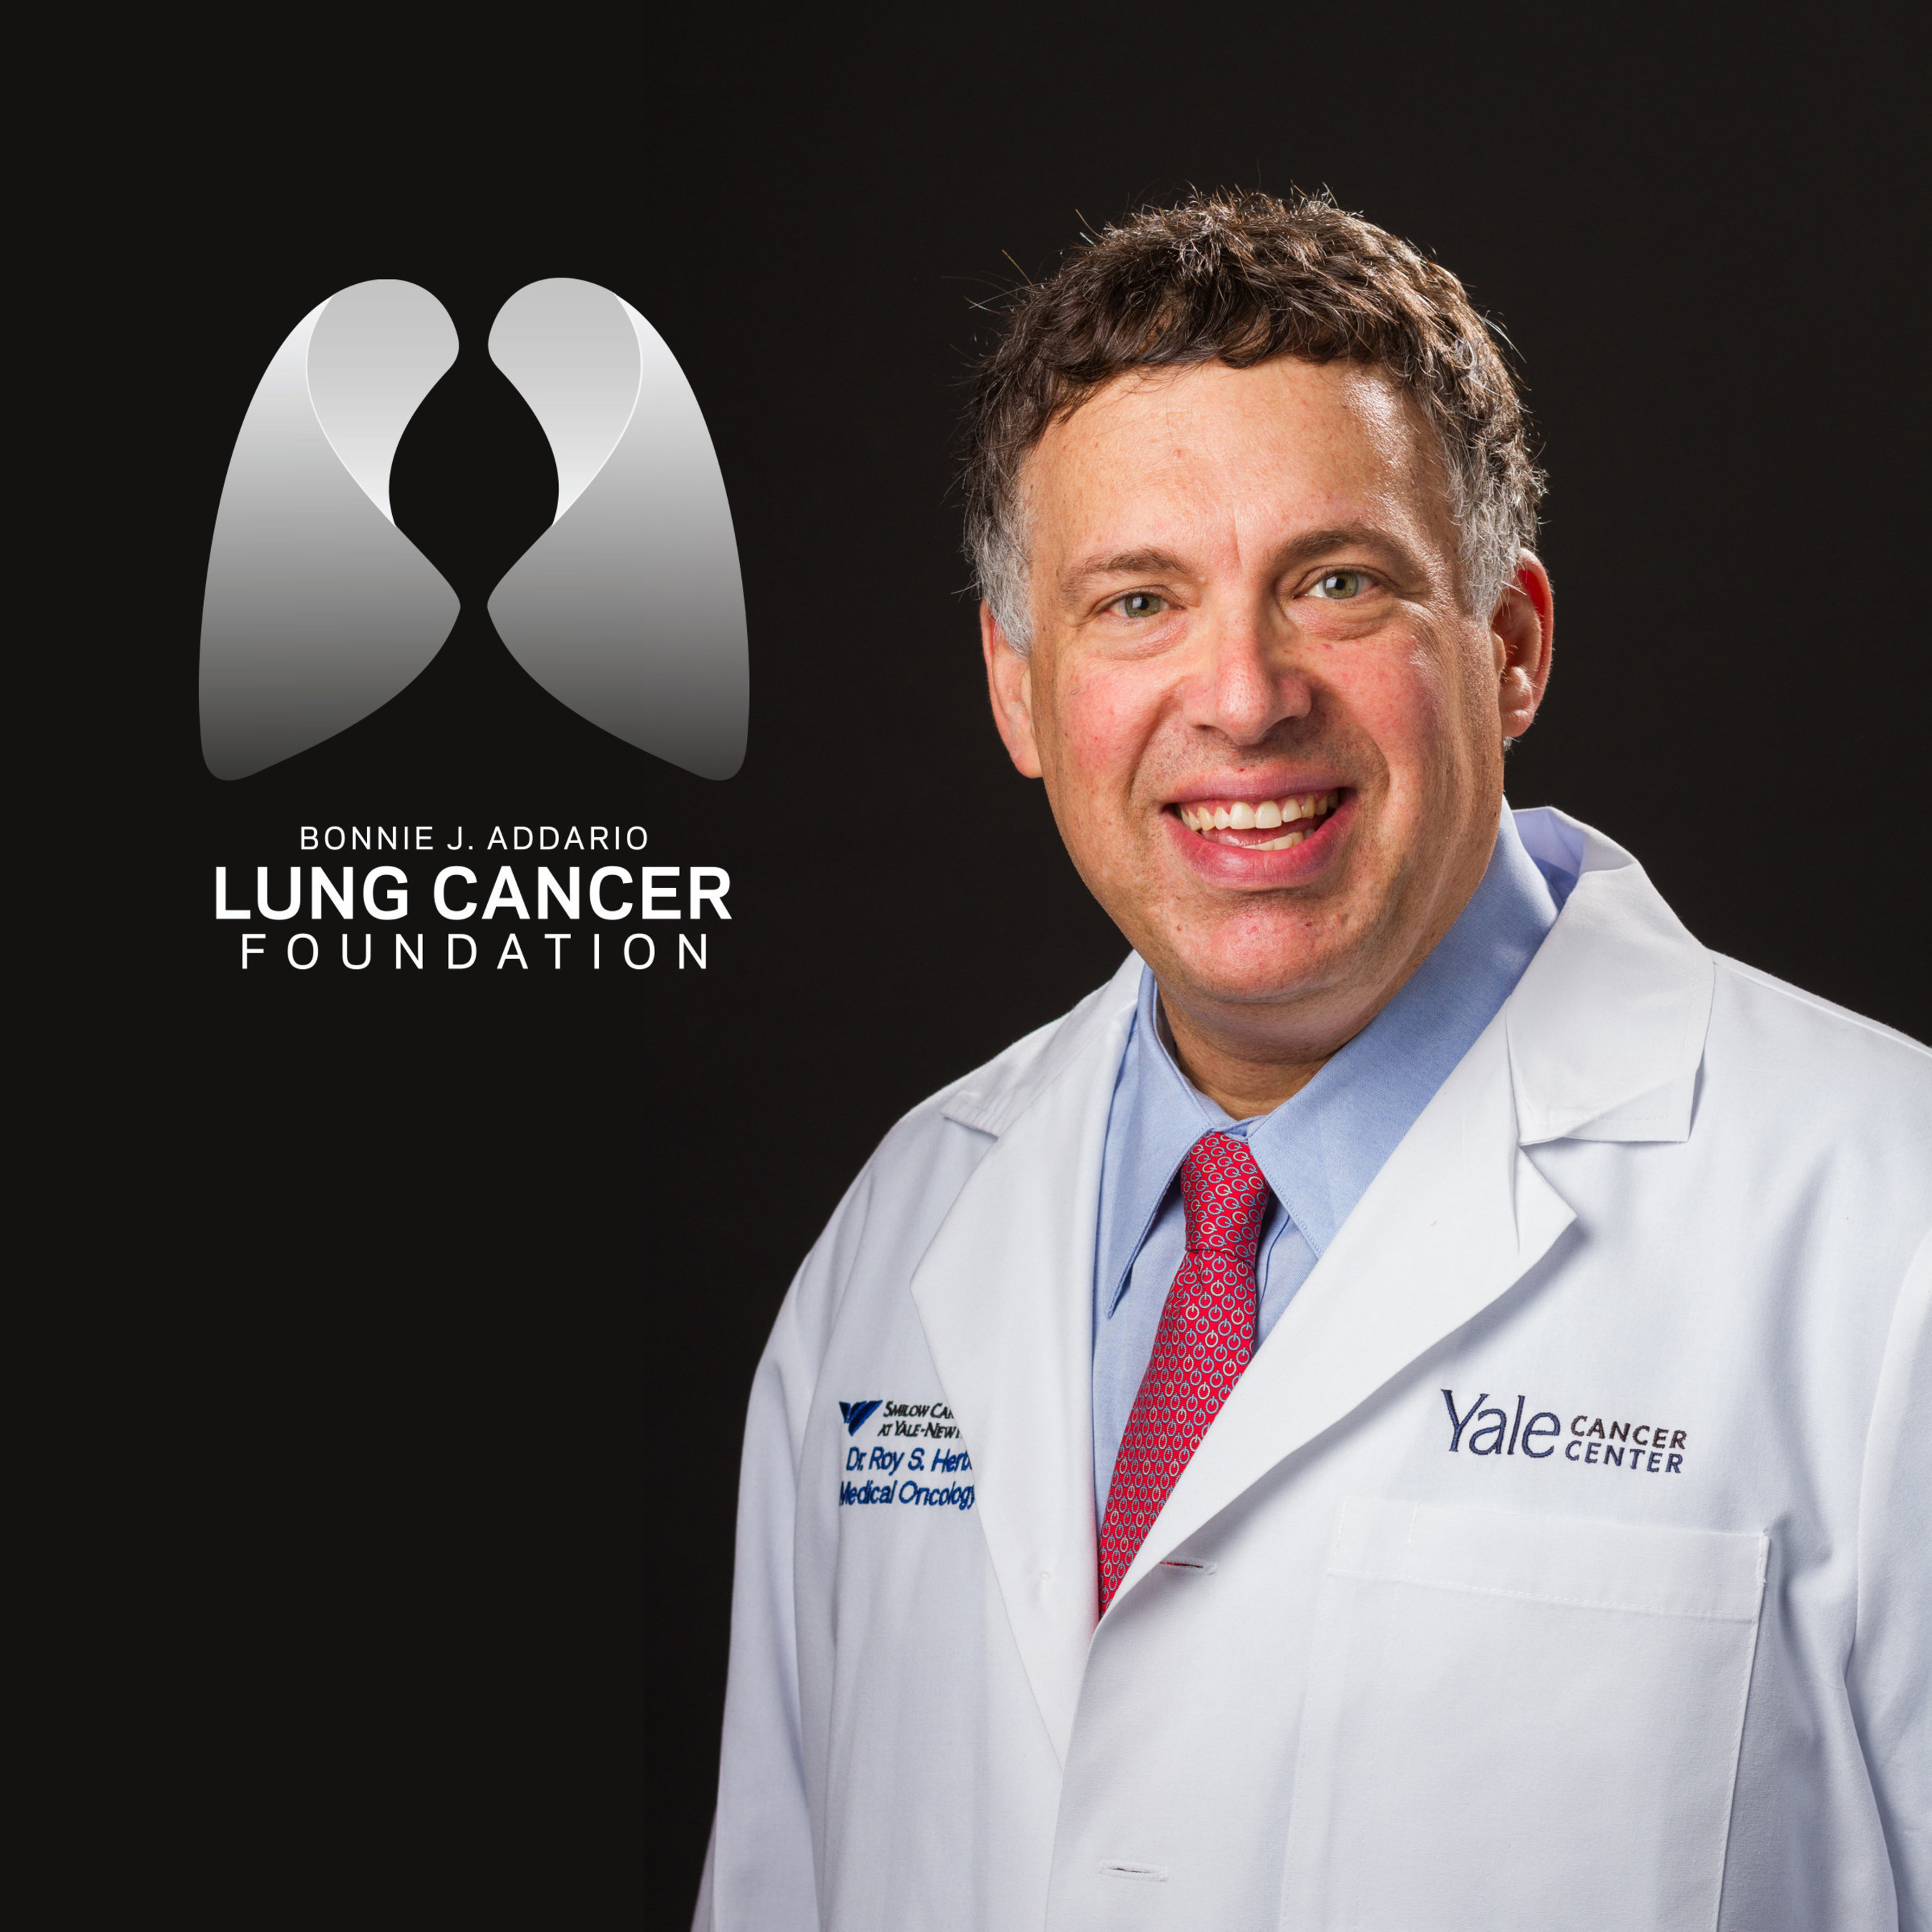 The Bonnie J. Addario Lung Cancer Foundation to Honor Roy Herbst, M.D., Ph.D. with the 2014 Addario Lectureship Award at the 15th International Lung Cancer Congress on August 1 in Huntington Beach, California. (PRNewsFoto/Addario Lung Cancer Foundation) (PRNewsFoto/Addario Lung Cancer Foundation)